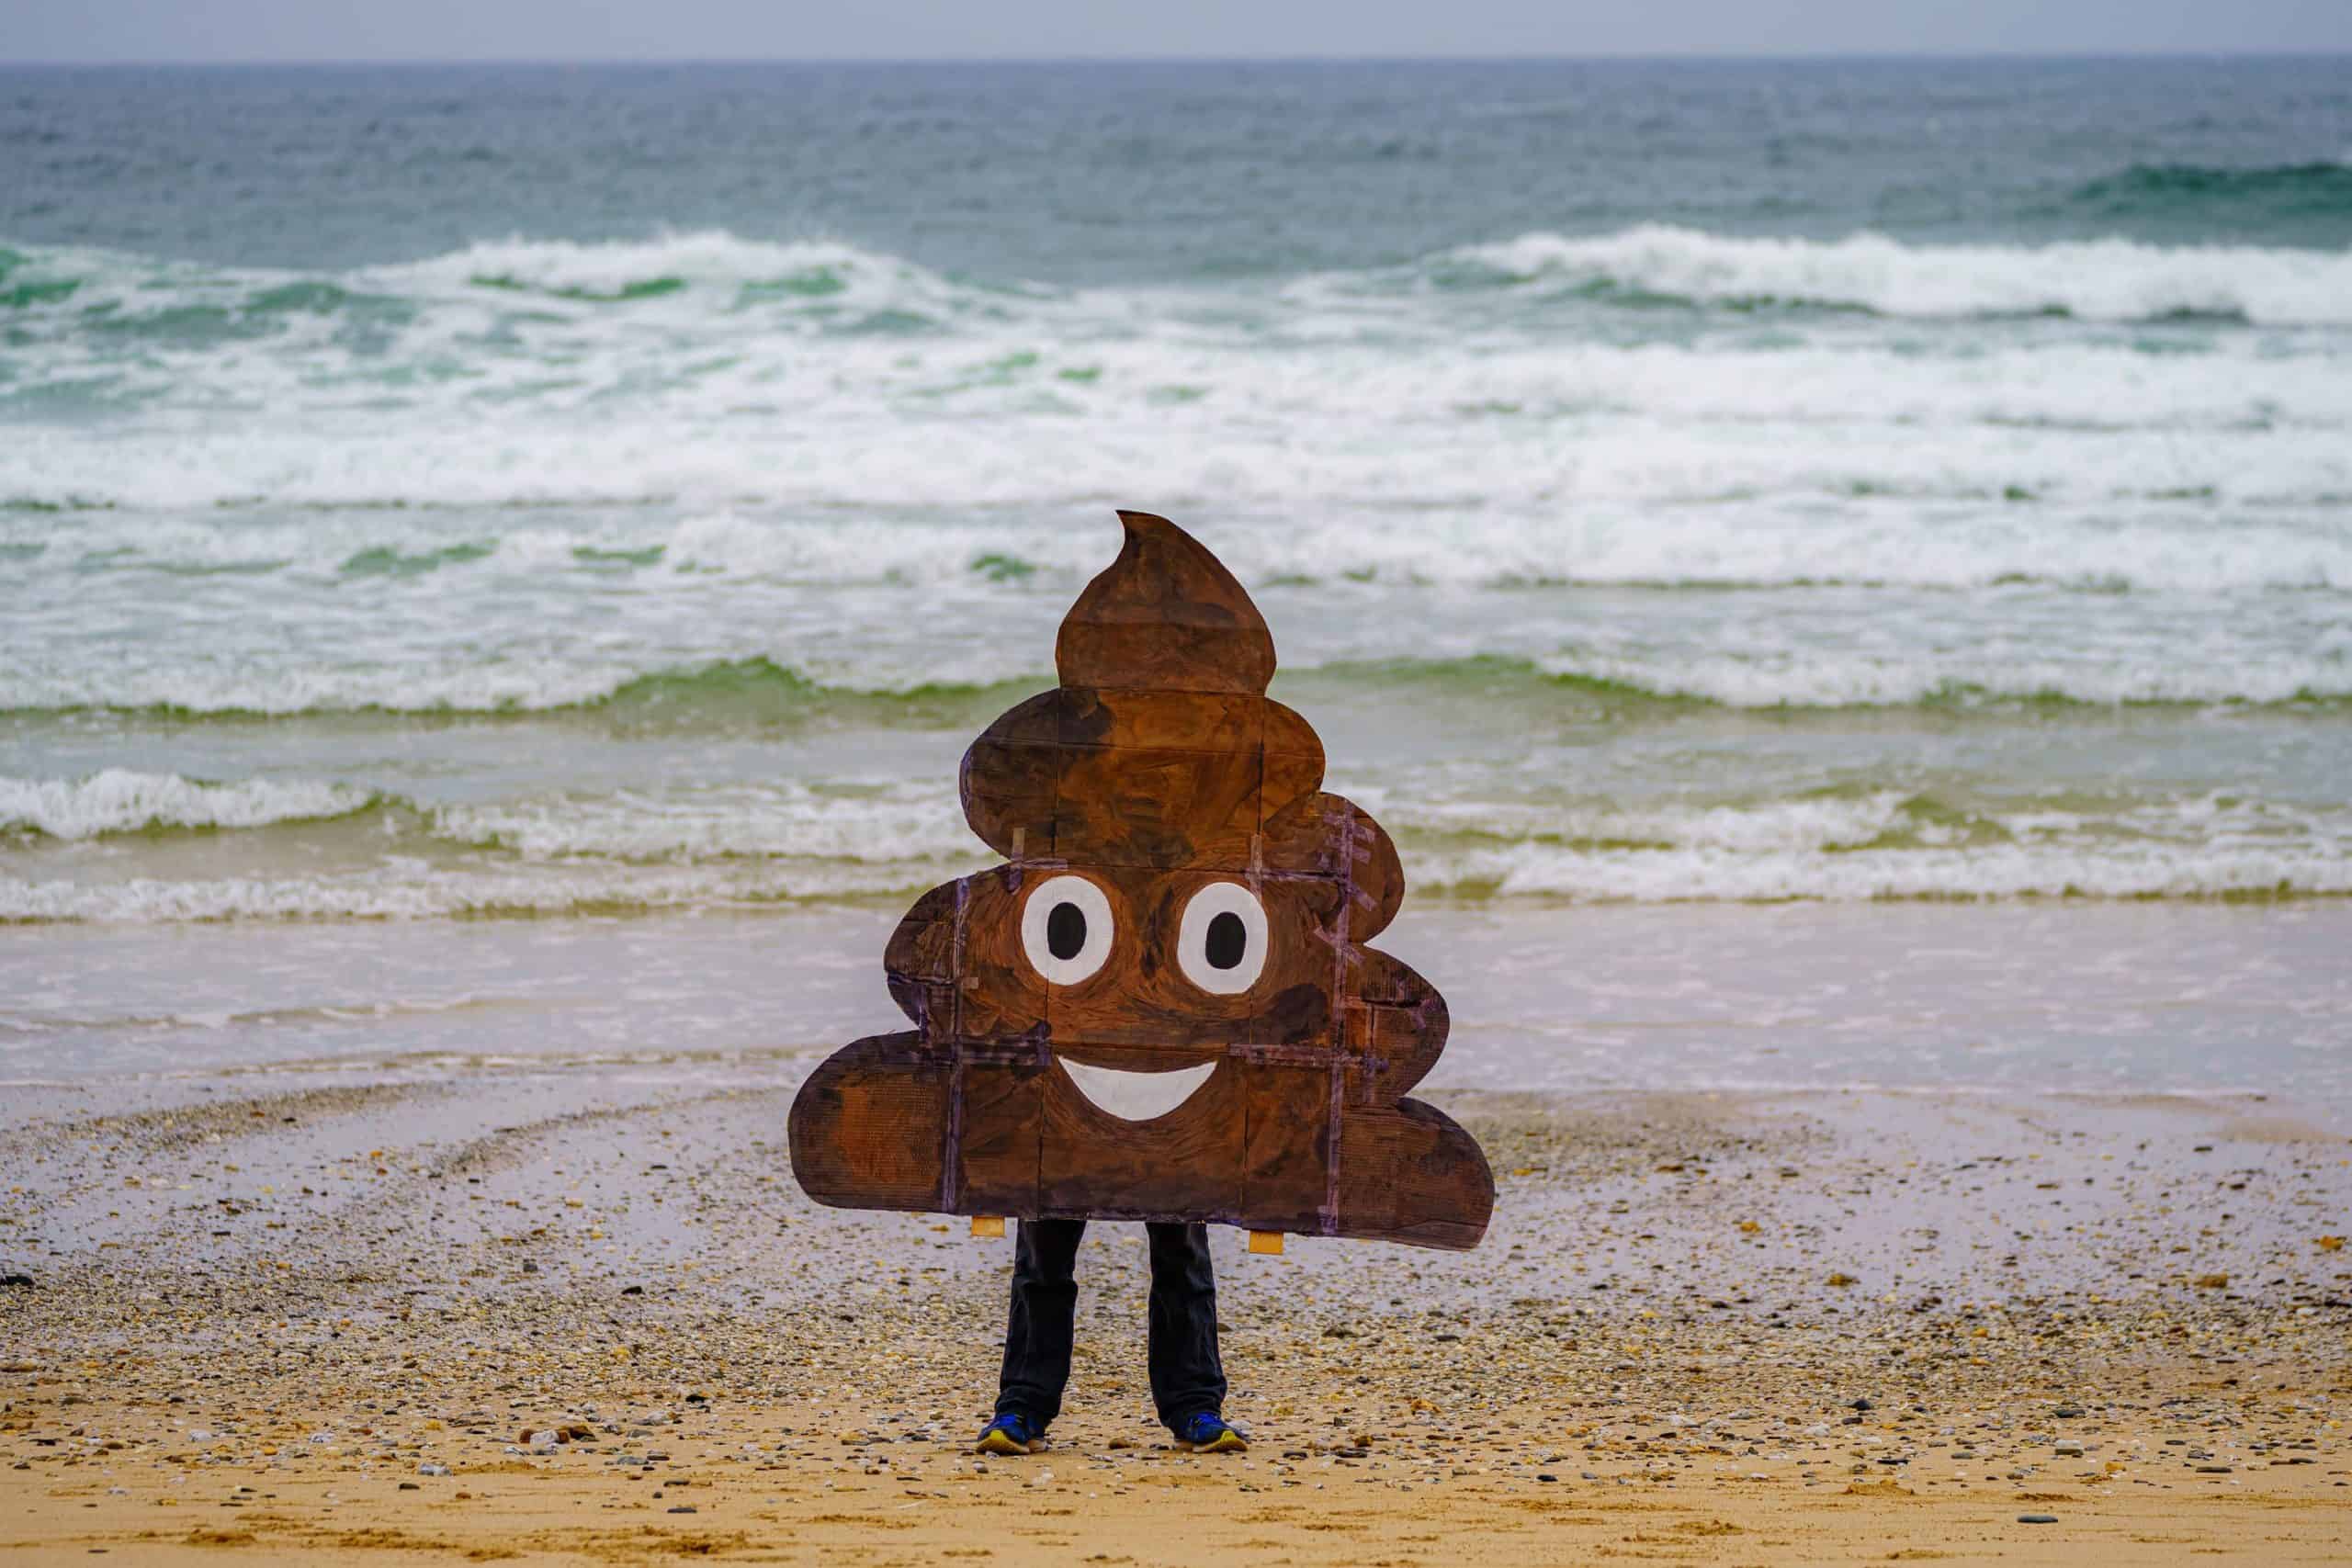 Fancy a swim? Sorry, the beaches are covered in sewage